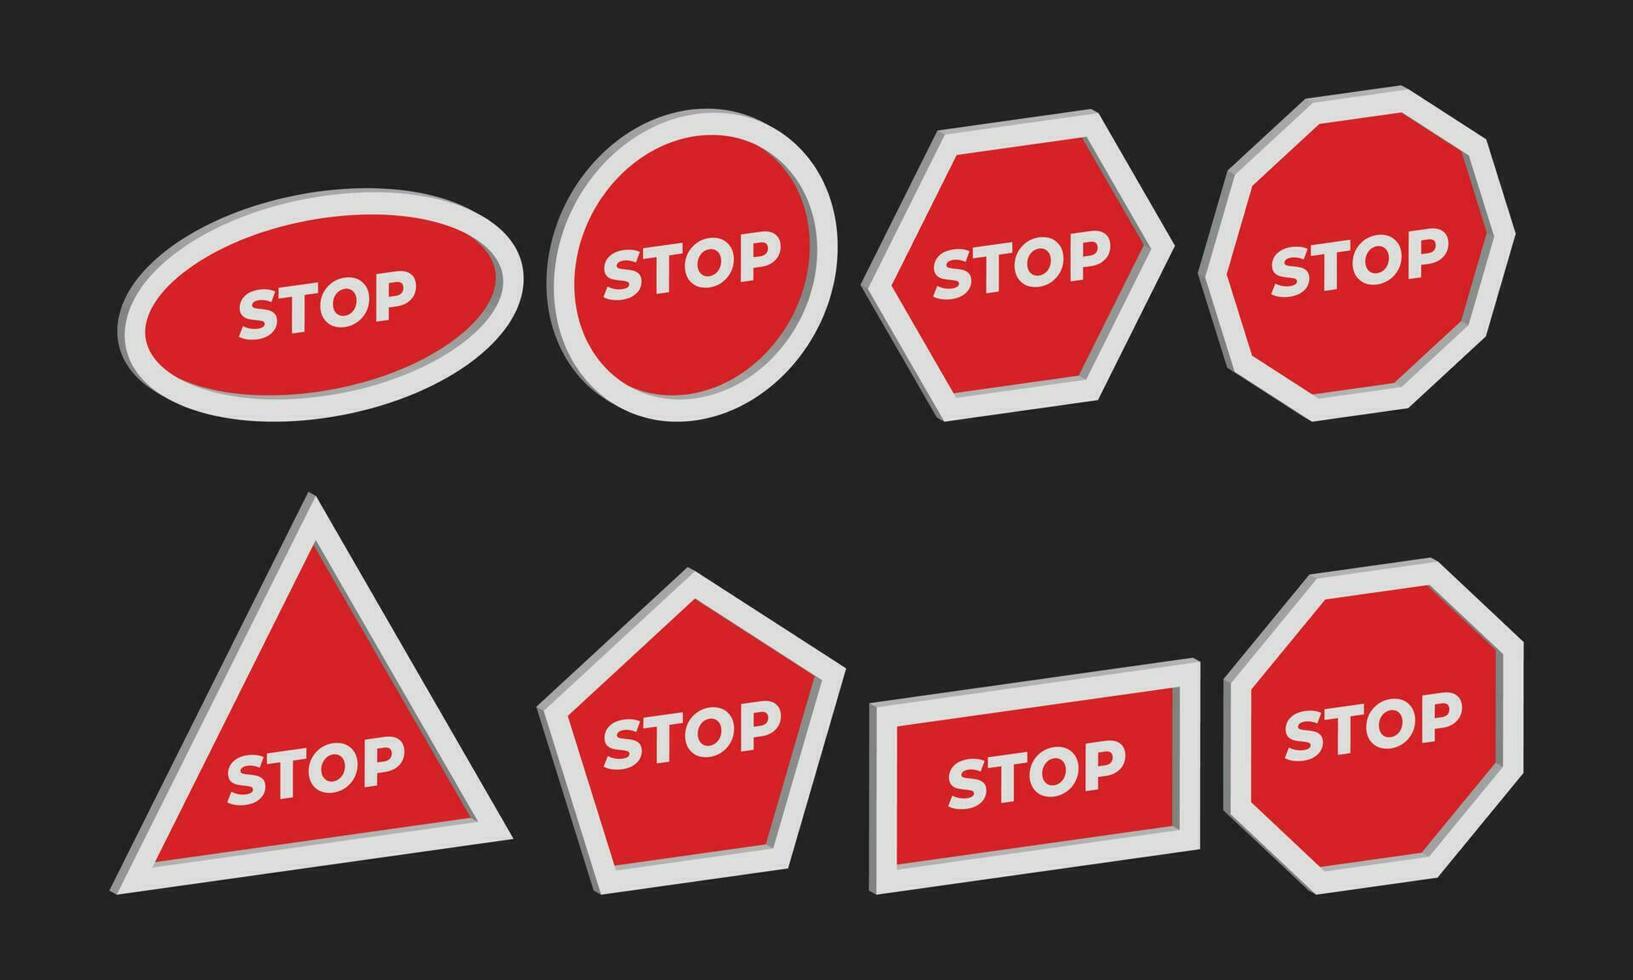 Stop sign icon design in isometric style for road sign vector